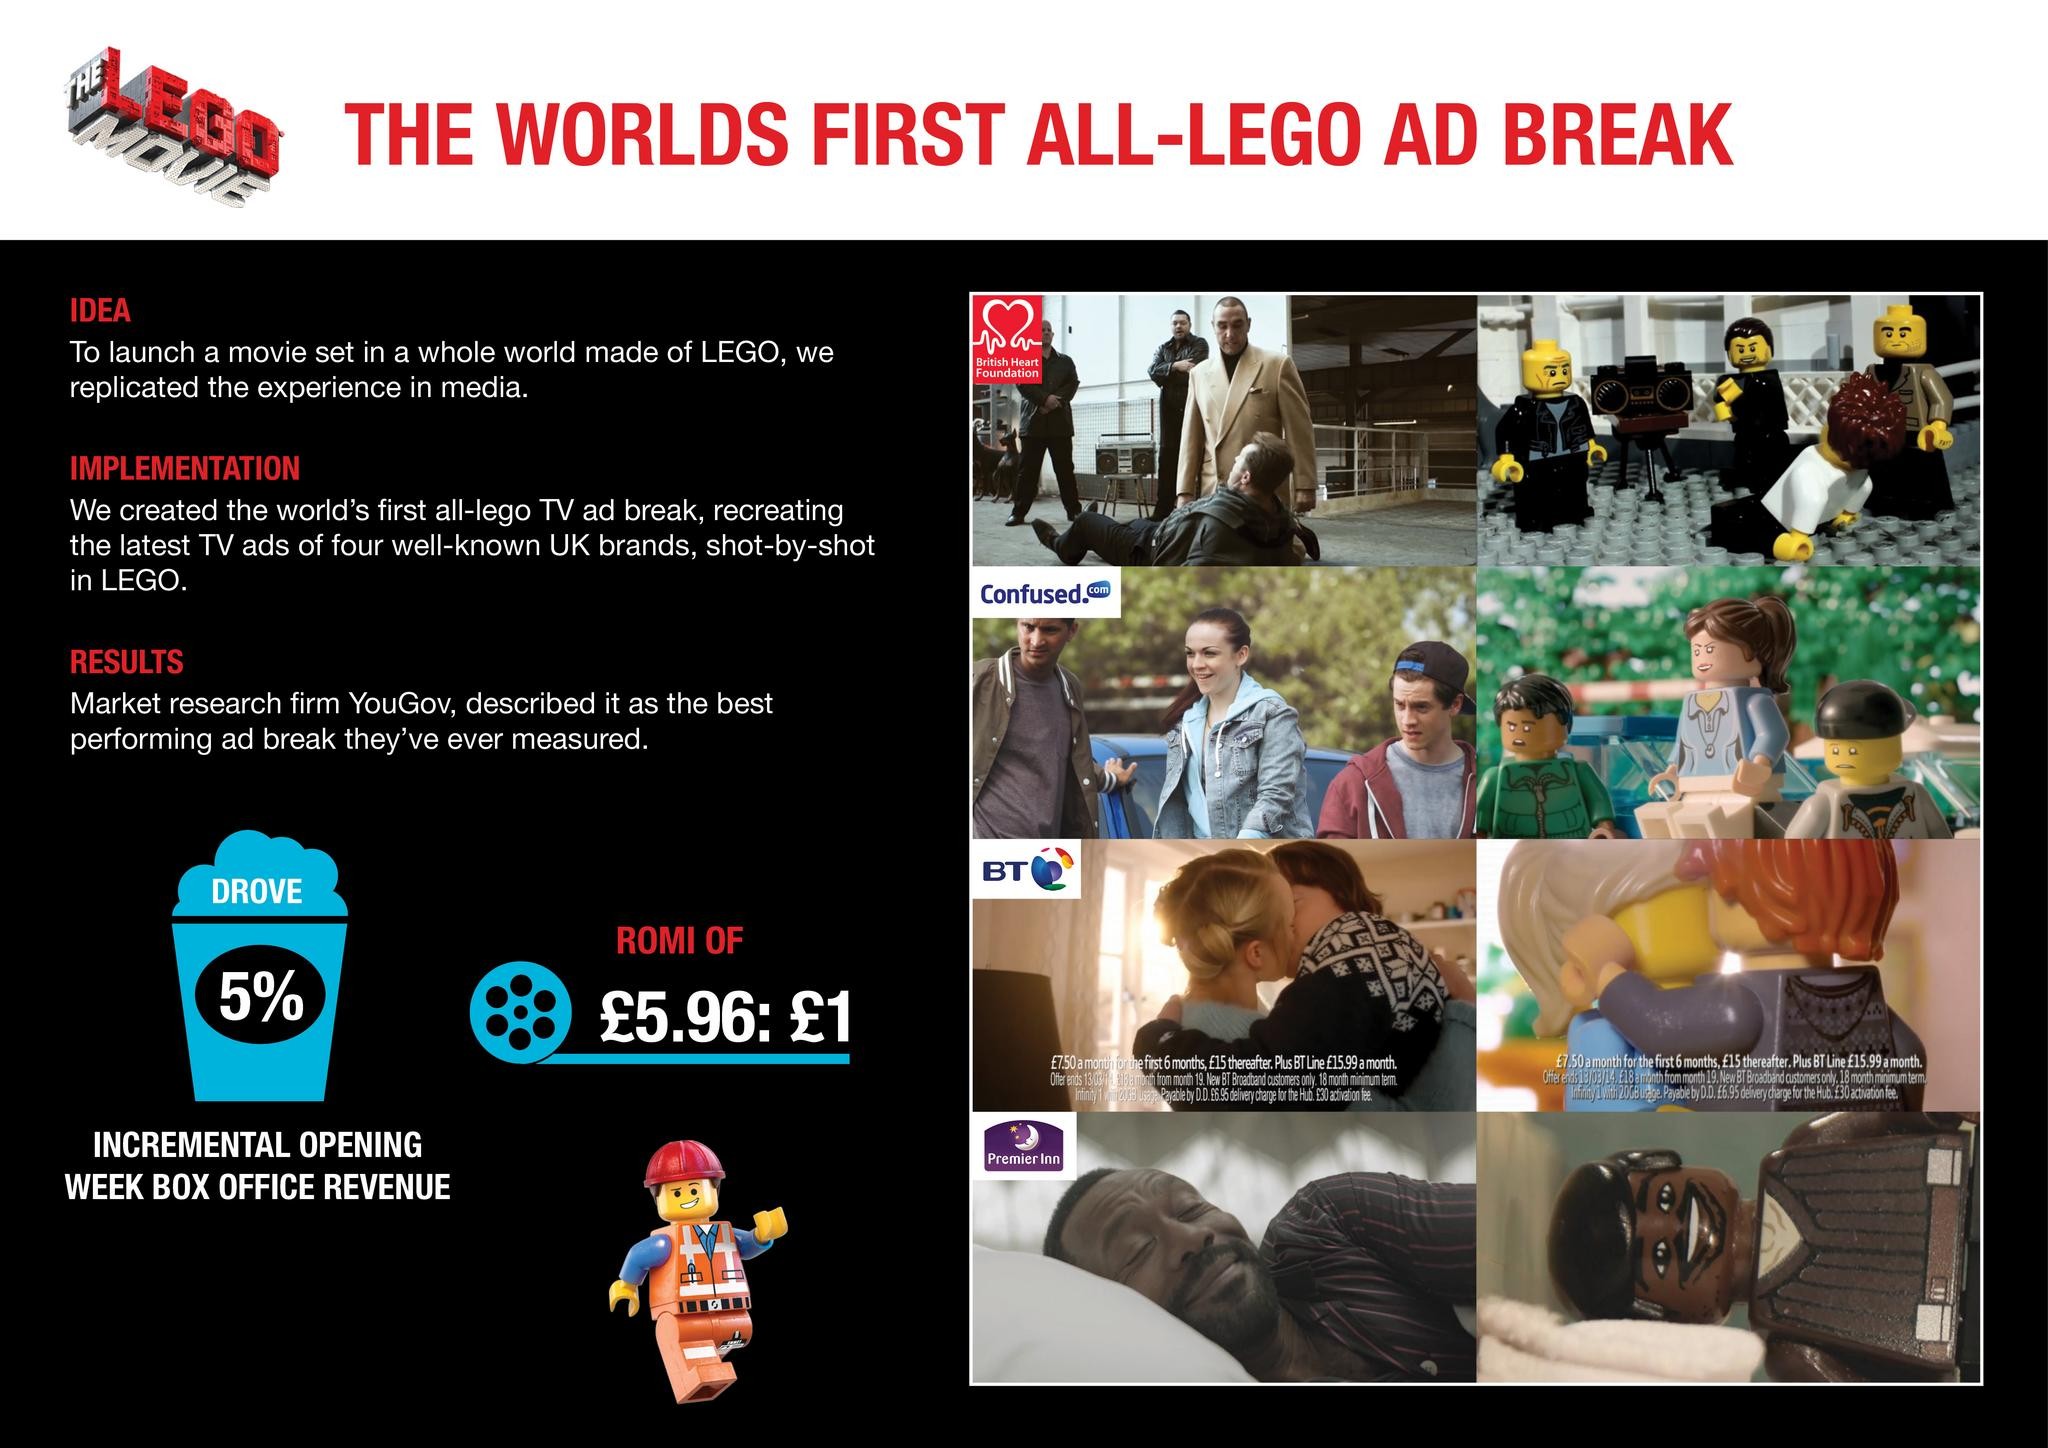 THE WORLD'S FIRST ALL-LEGO AD BREAK